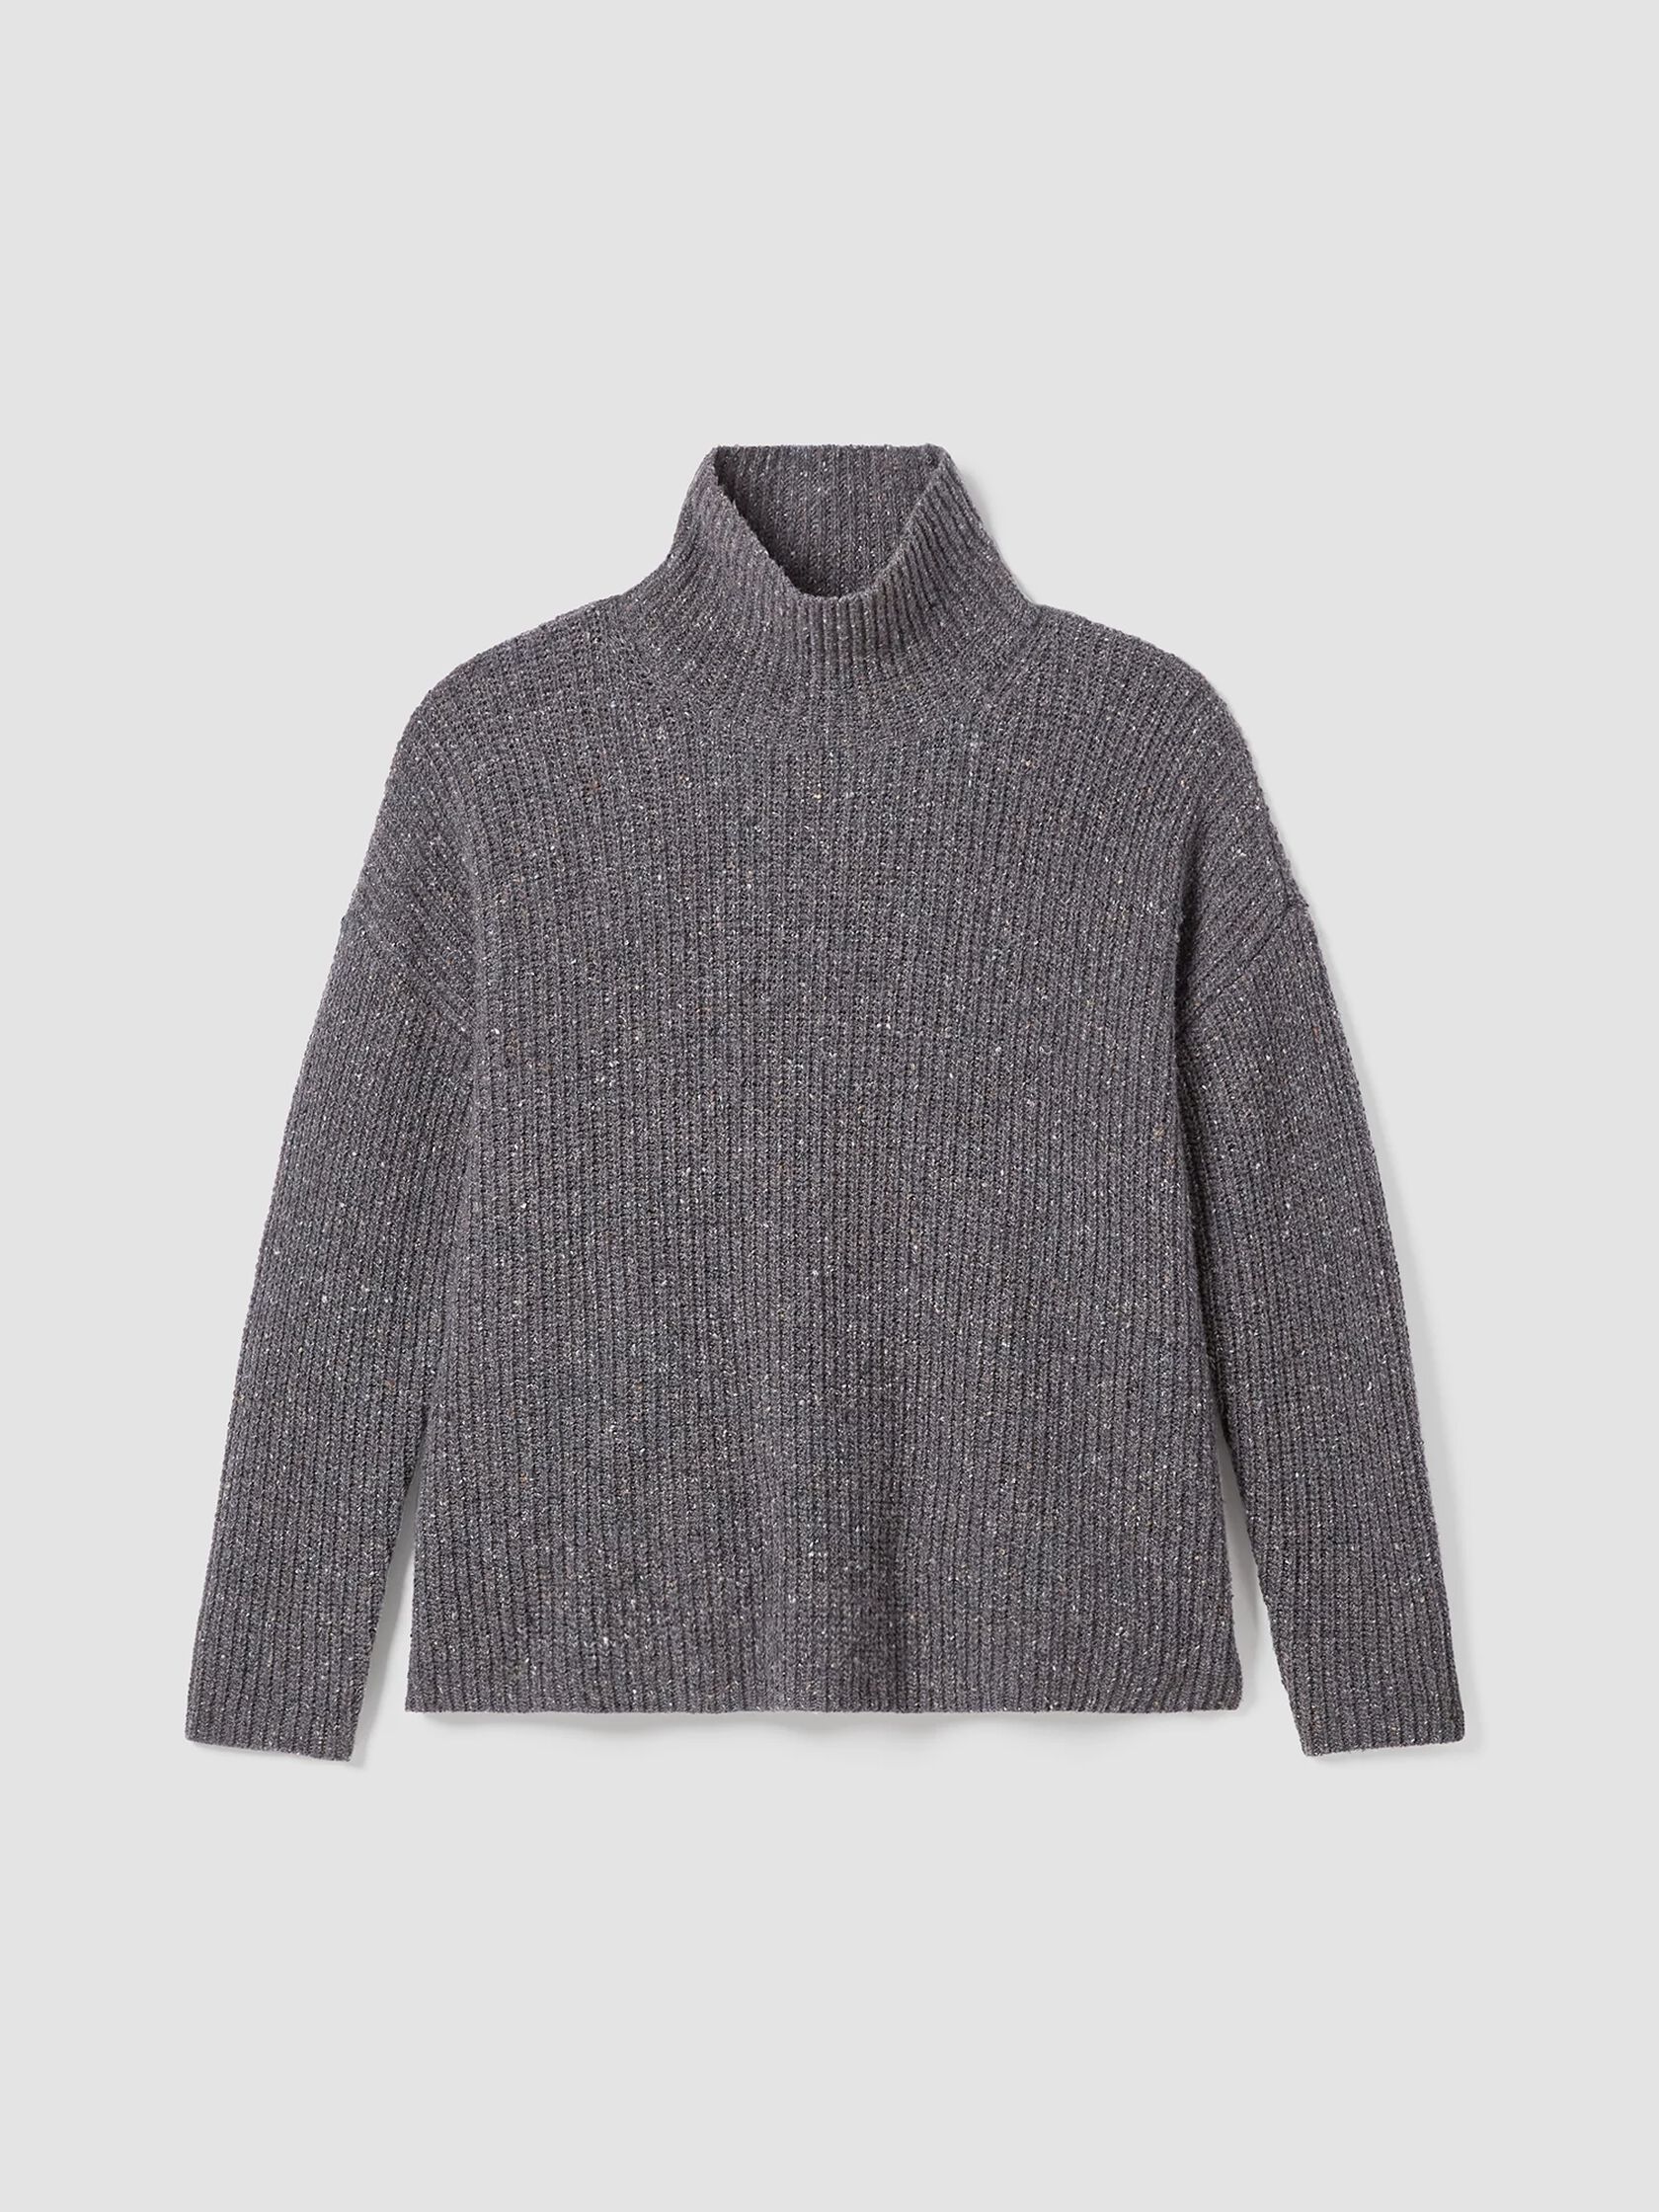 Recycled Cashmere Tweed Top in Our Responsible Wool